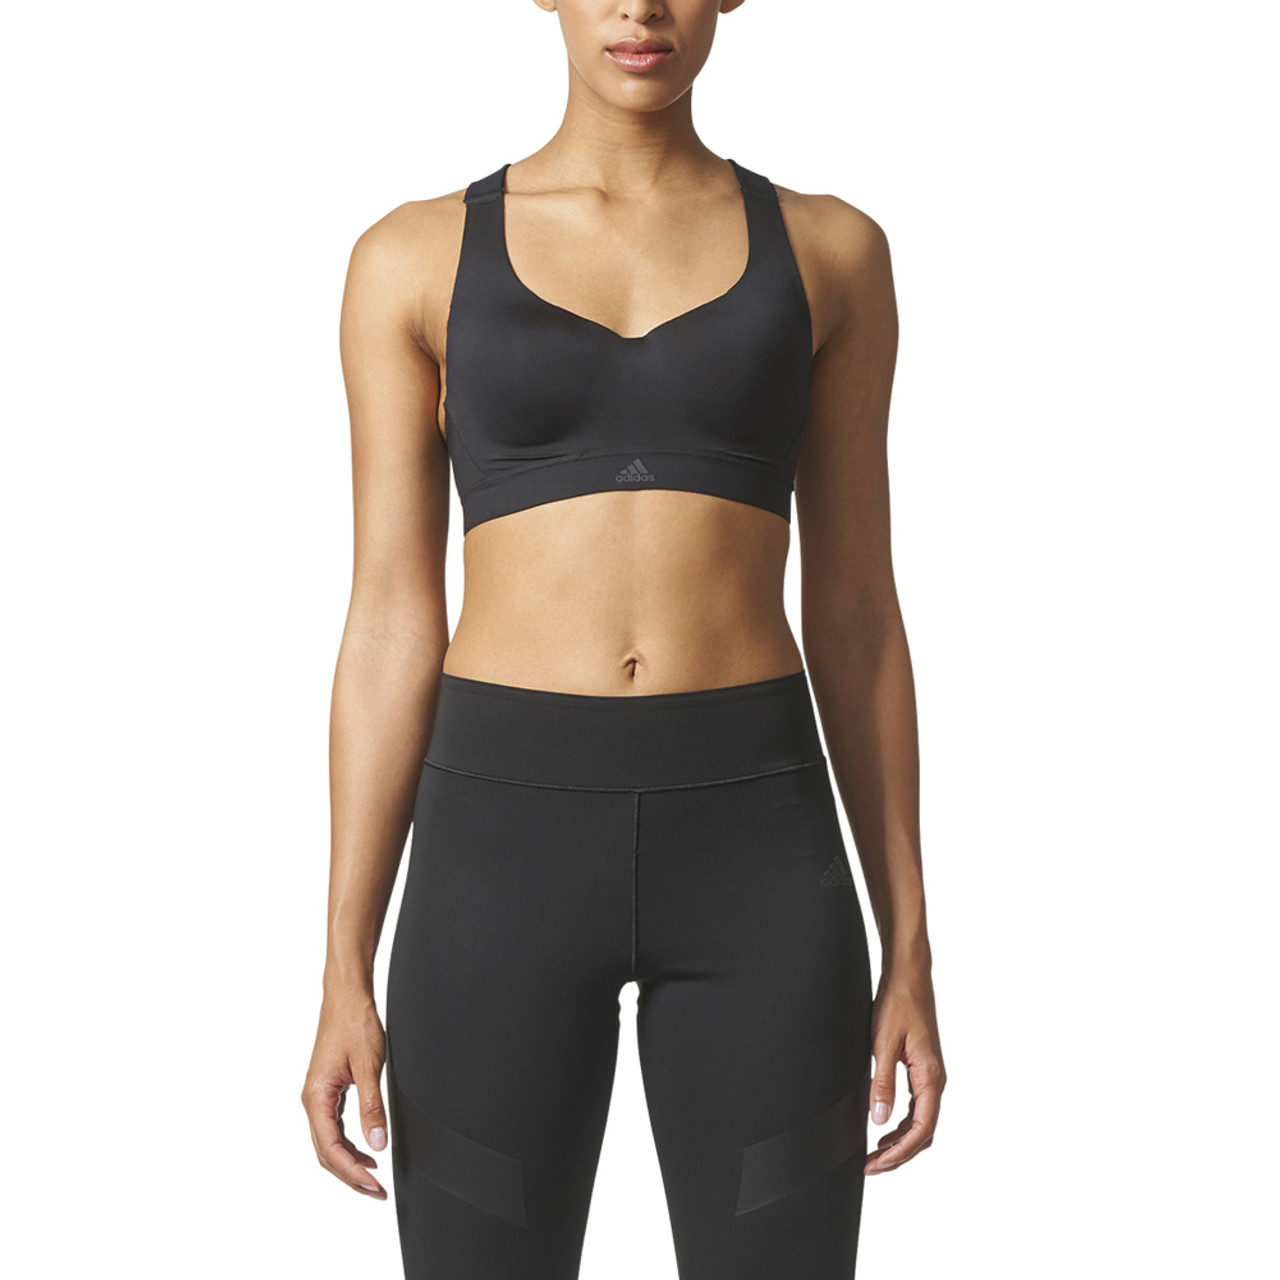 Adidas Molded Sports Bras for Women